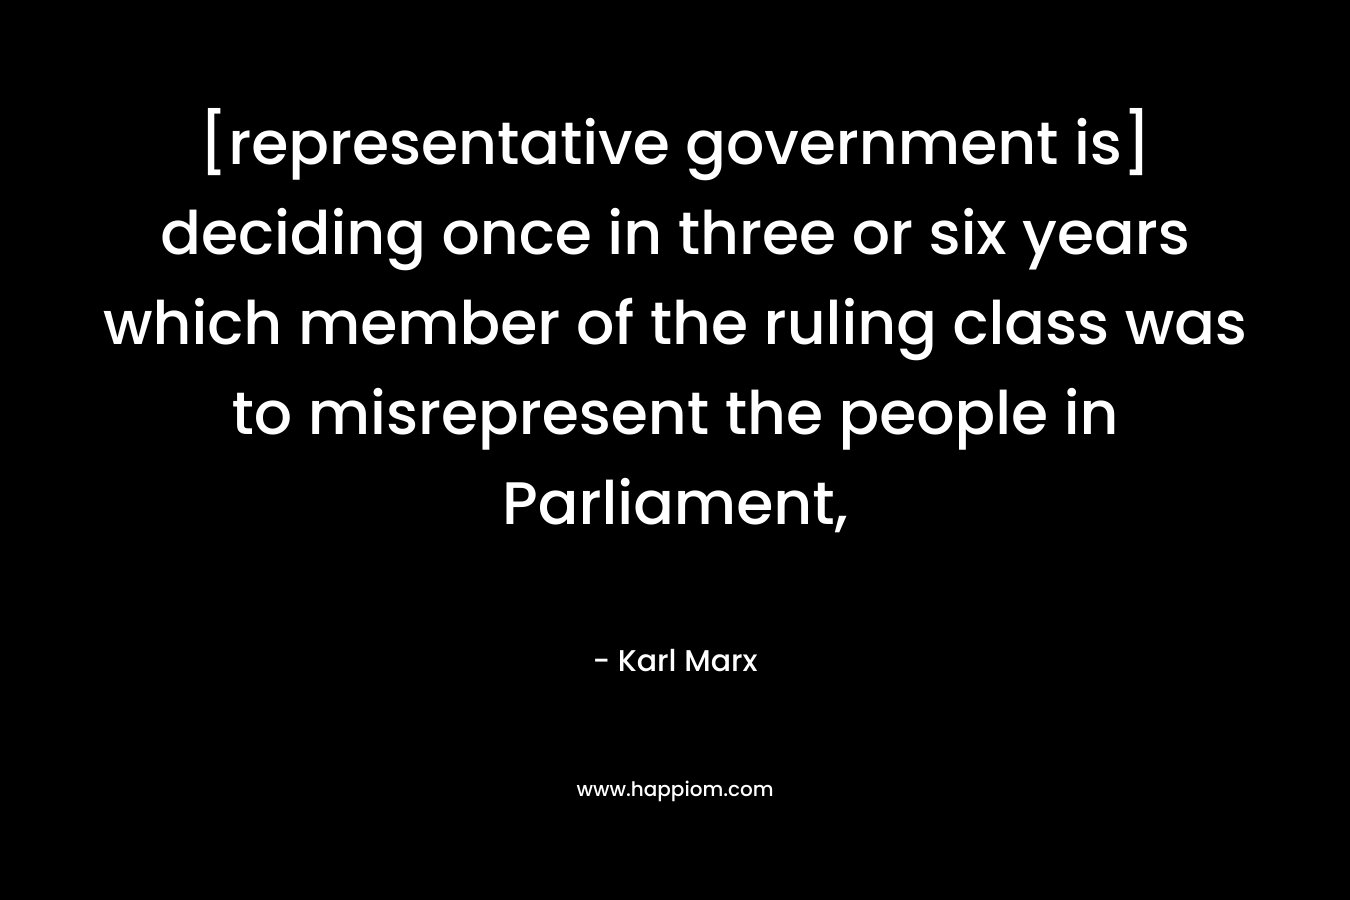 [representative government is] deciding once in three or six years which member of the ruling class was to misrepresent the people in Parliament,